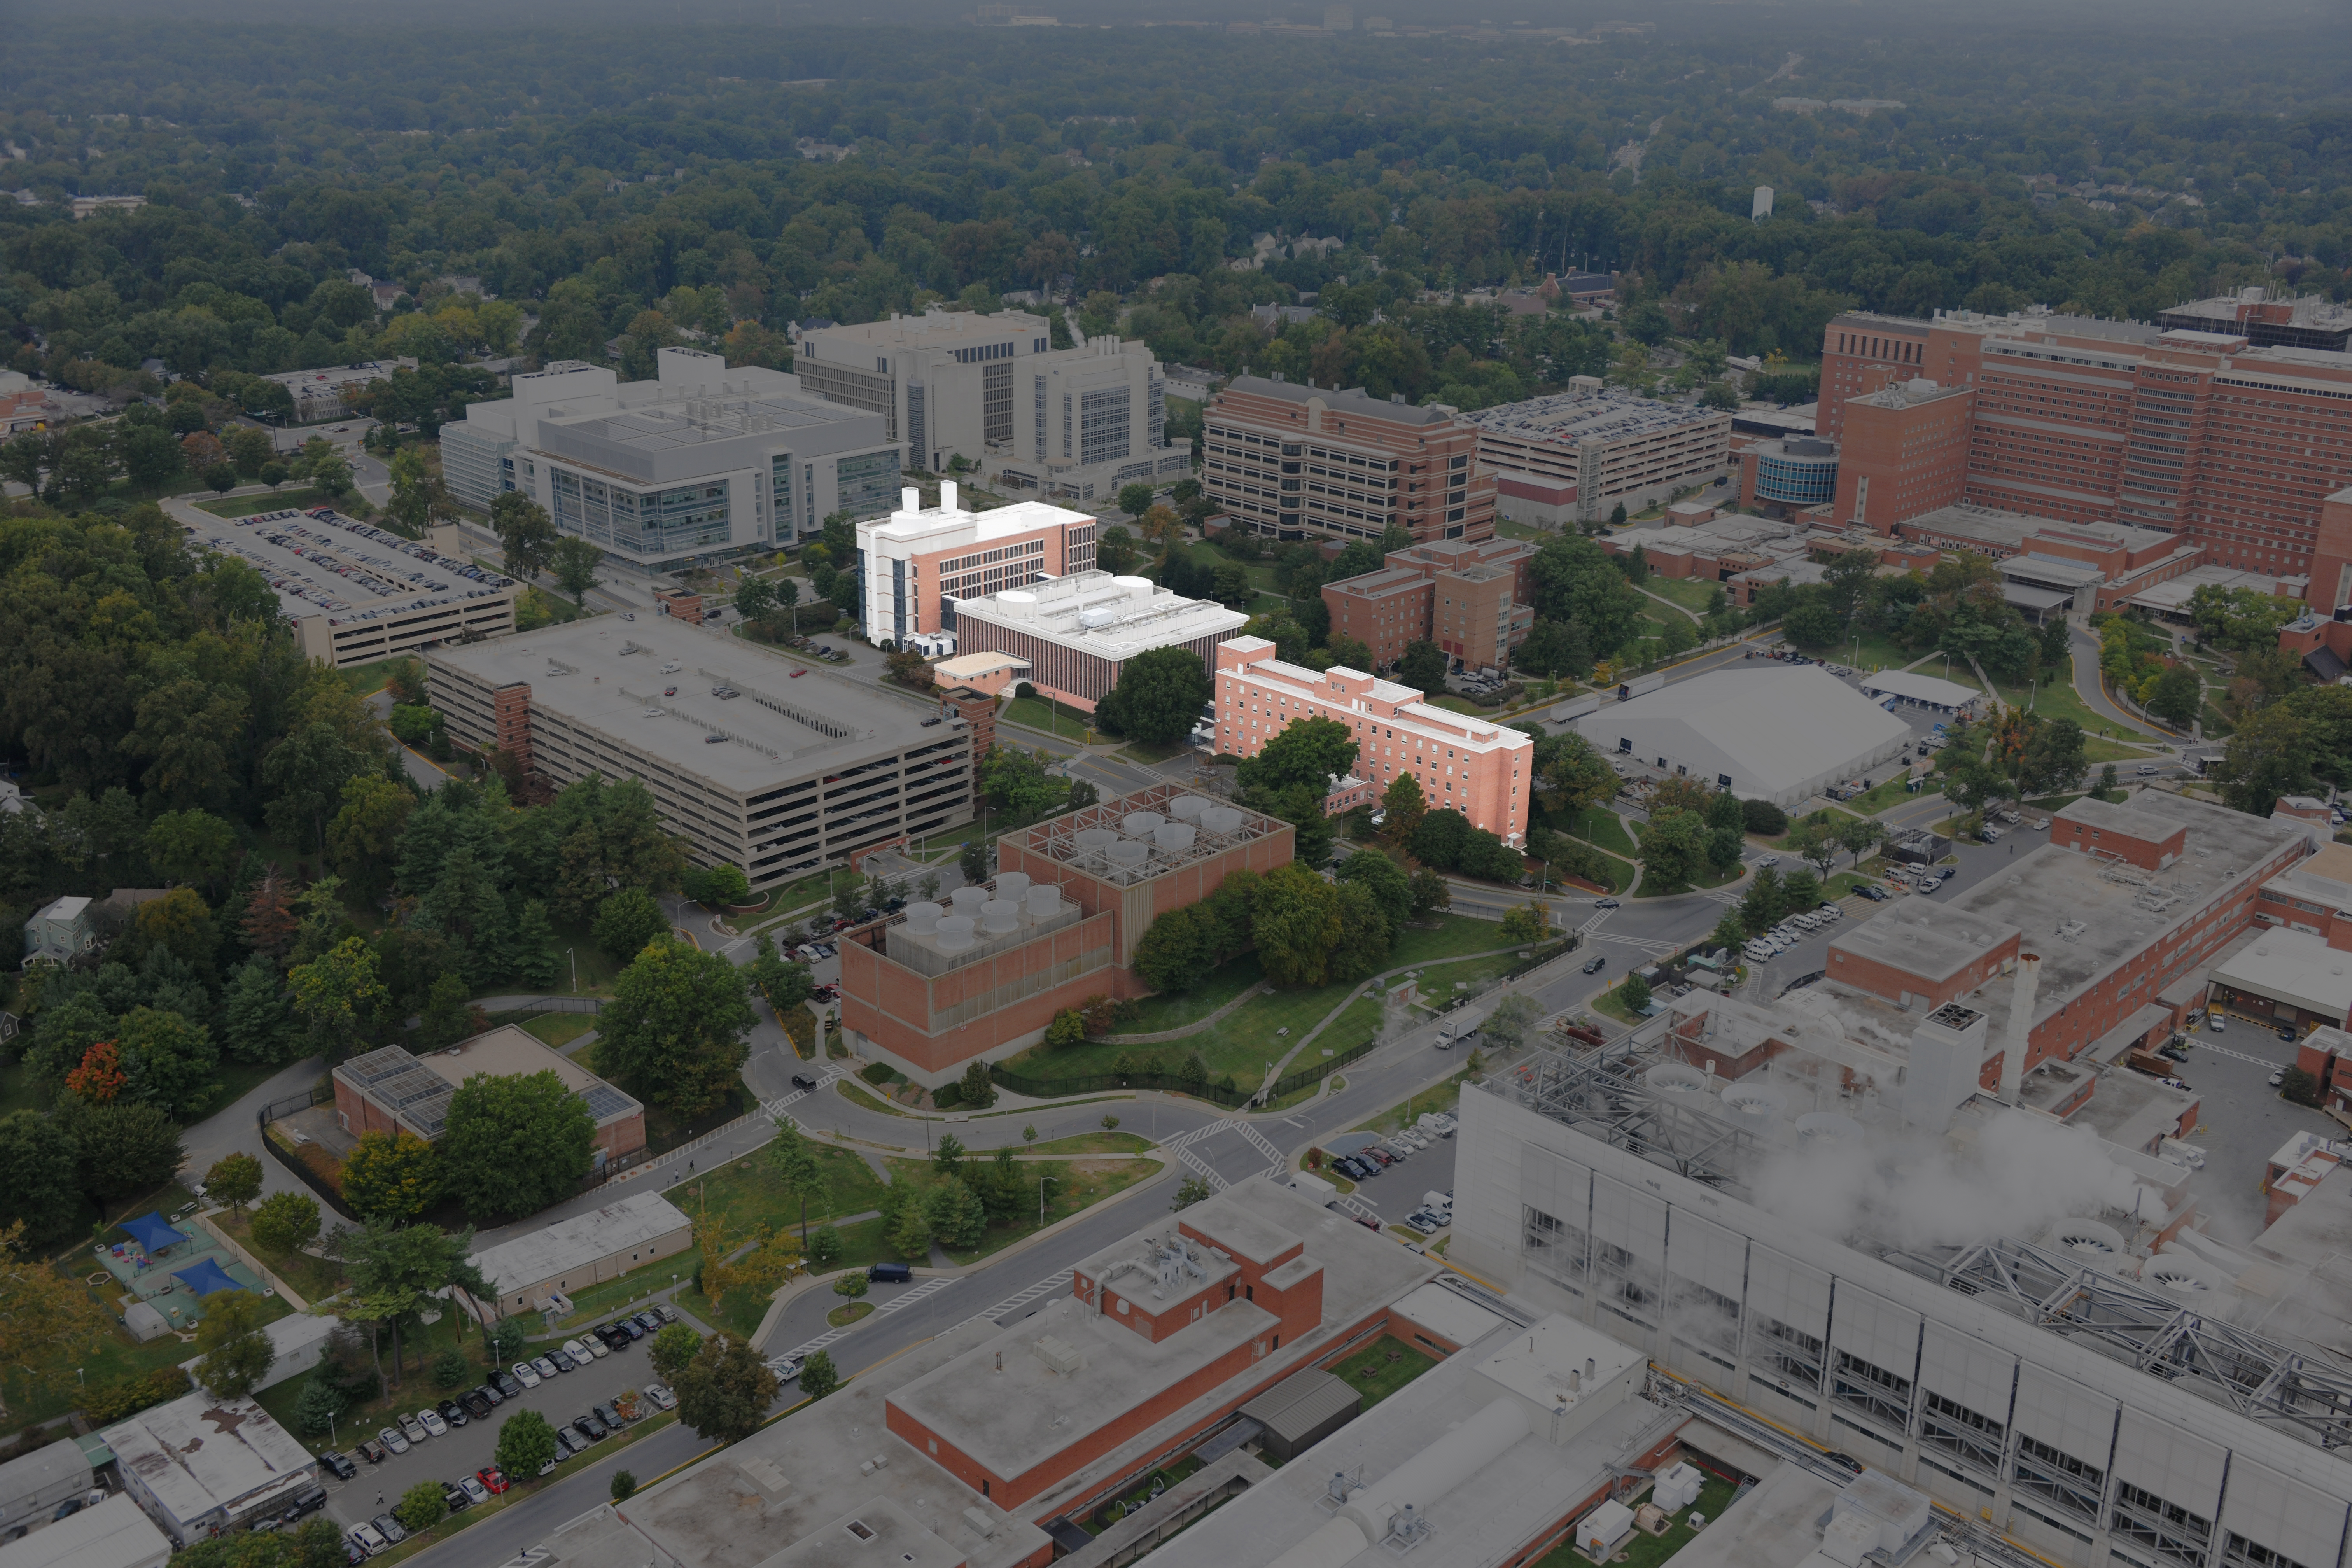 Aerial Image of the NIH campus taken in 2014